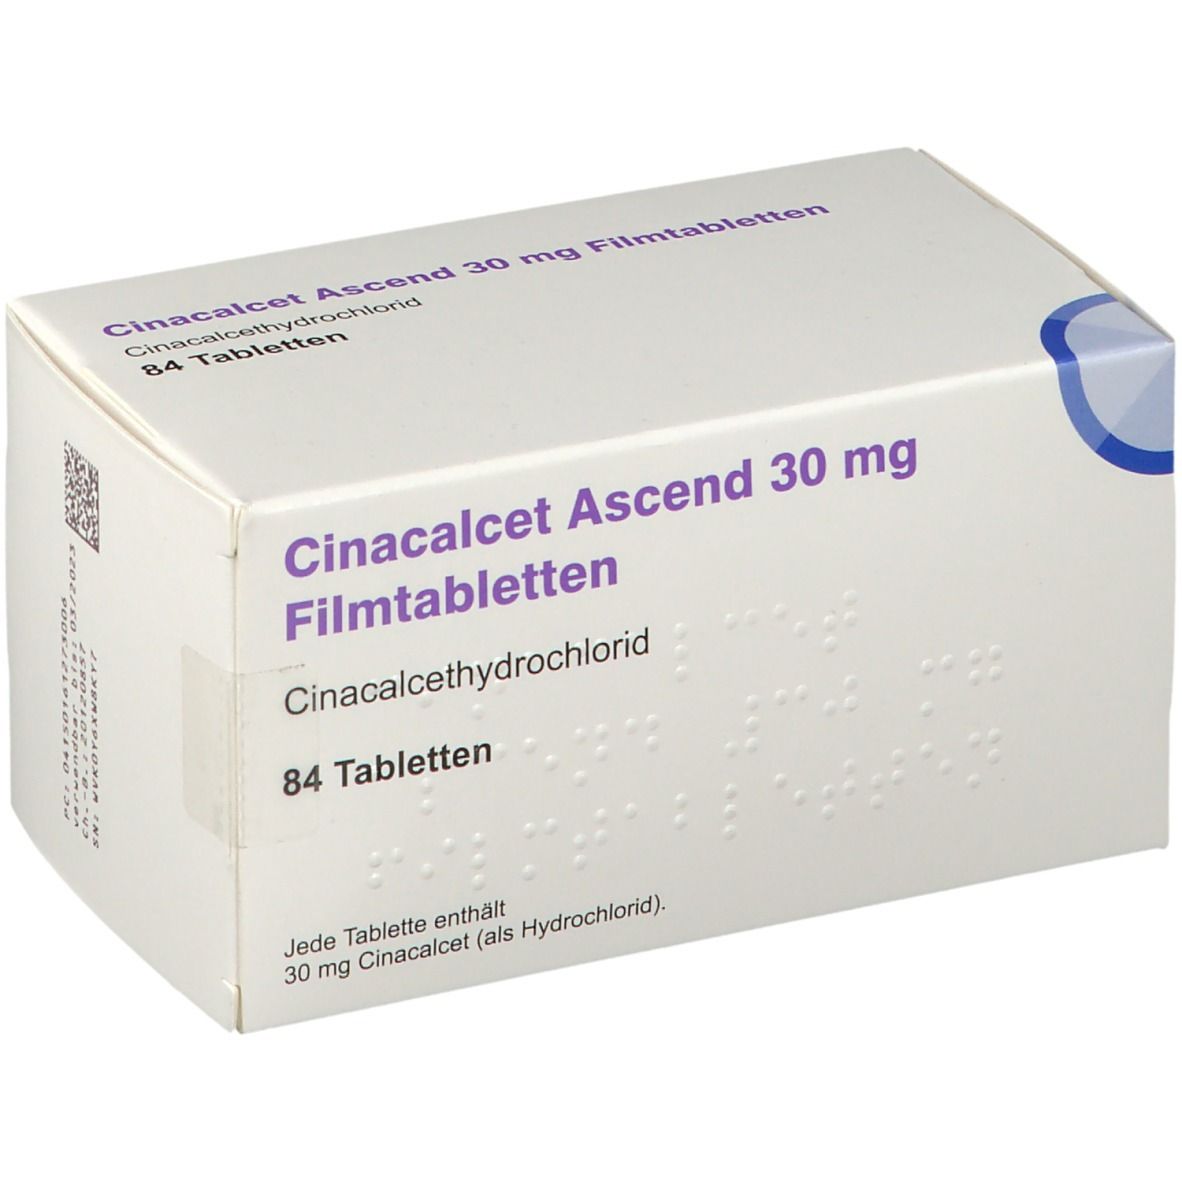 Cinacalcet Ascend 30 mg